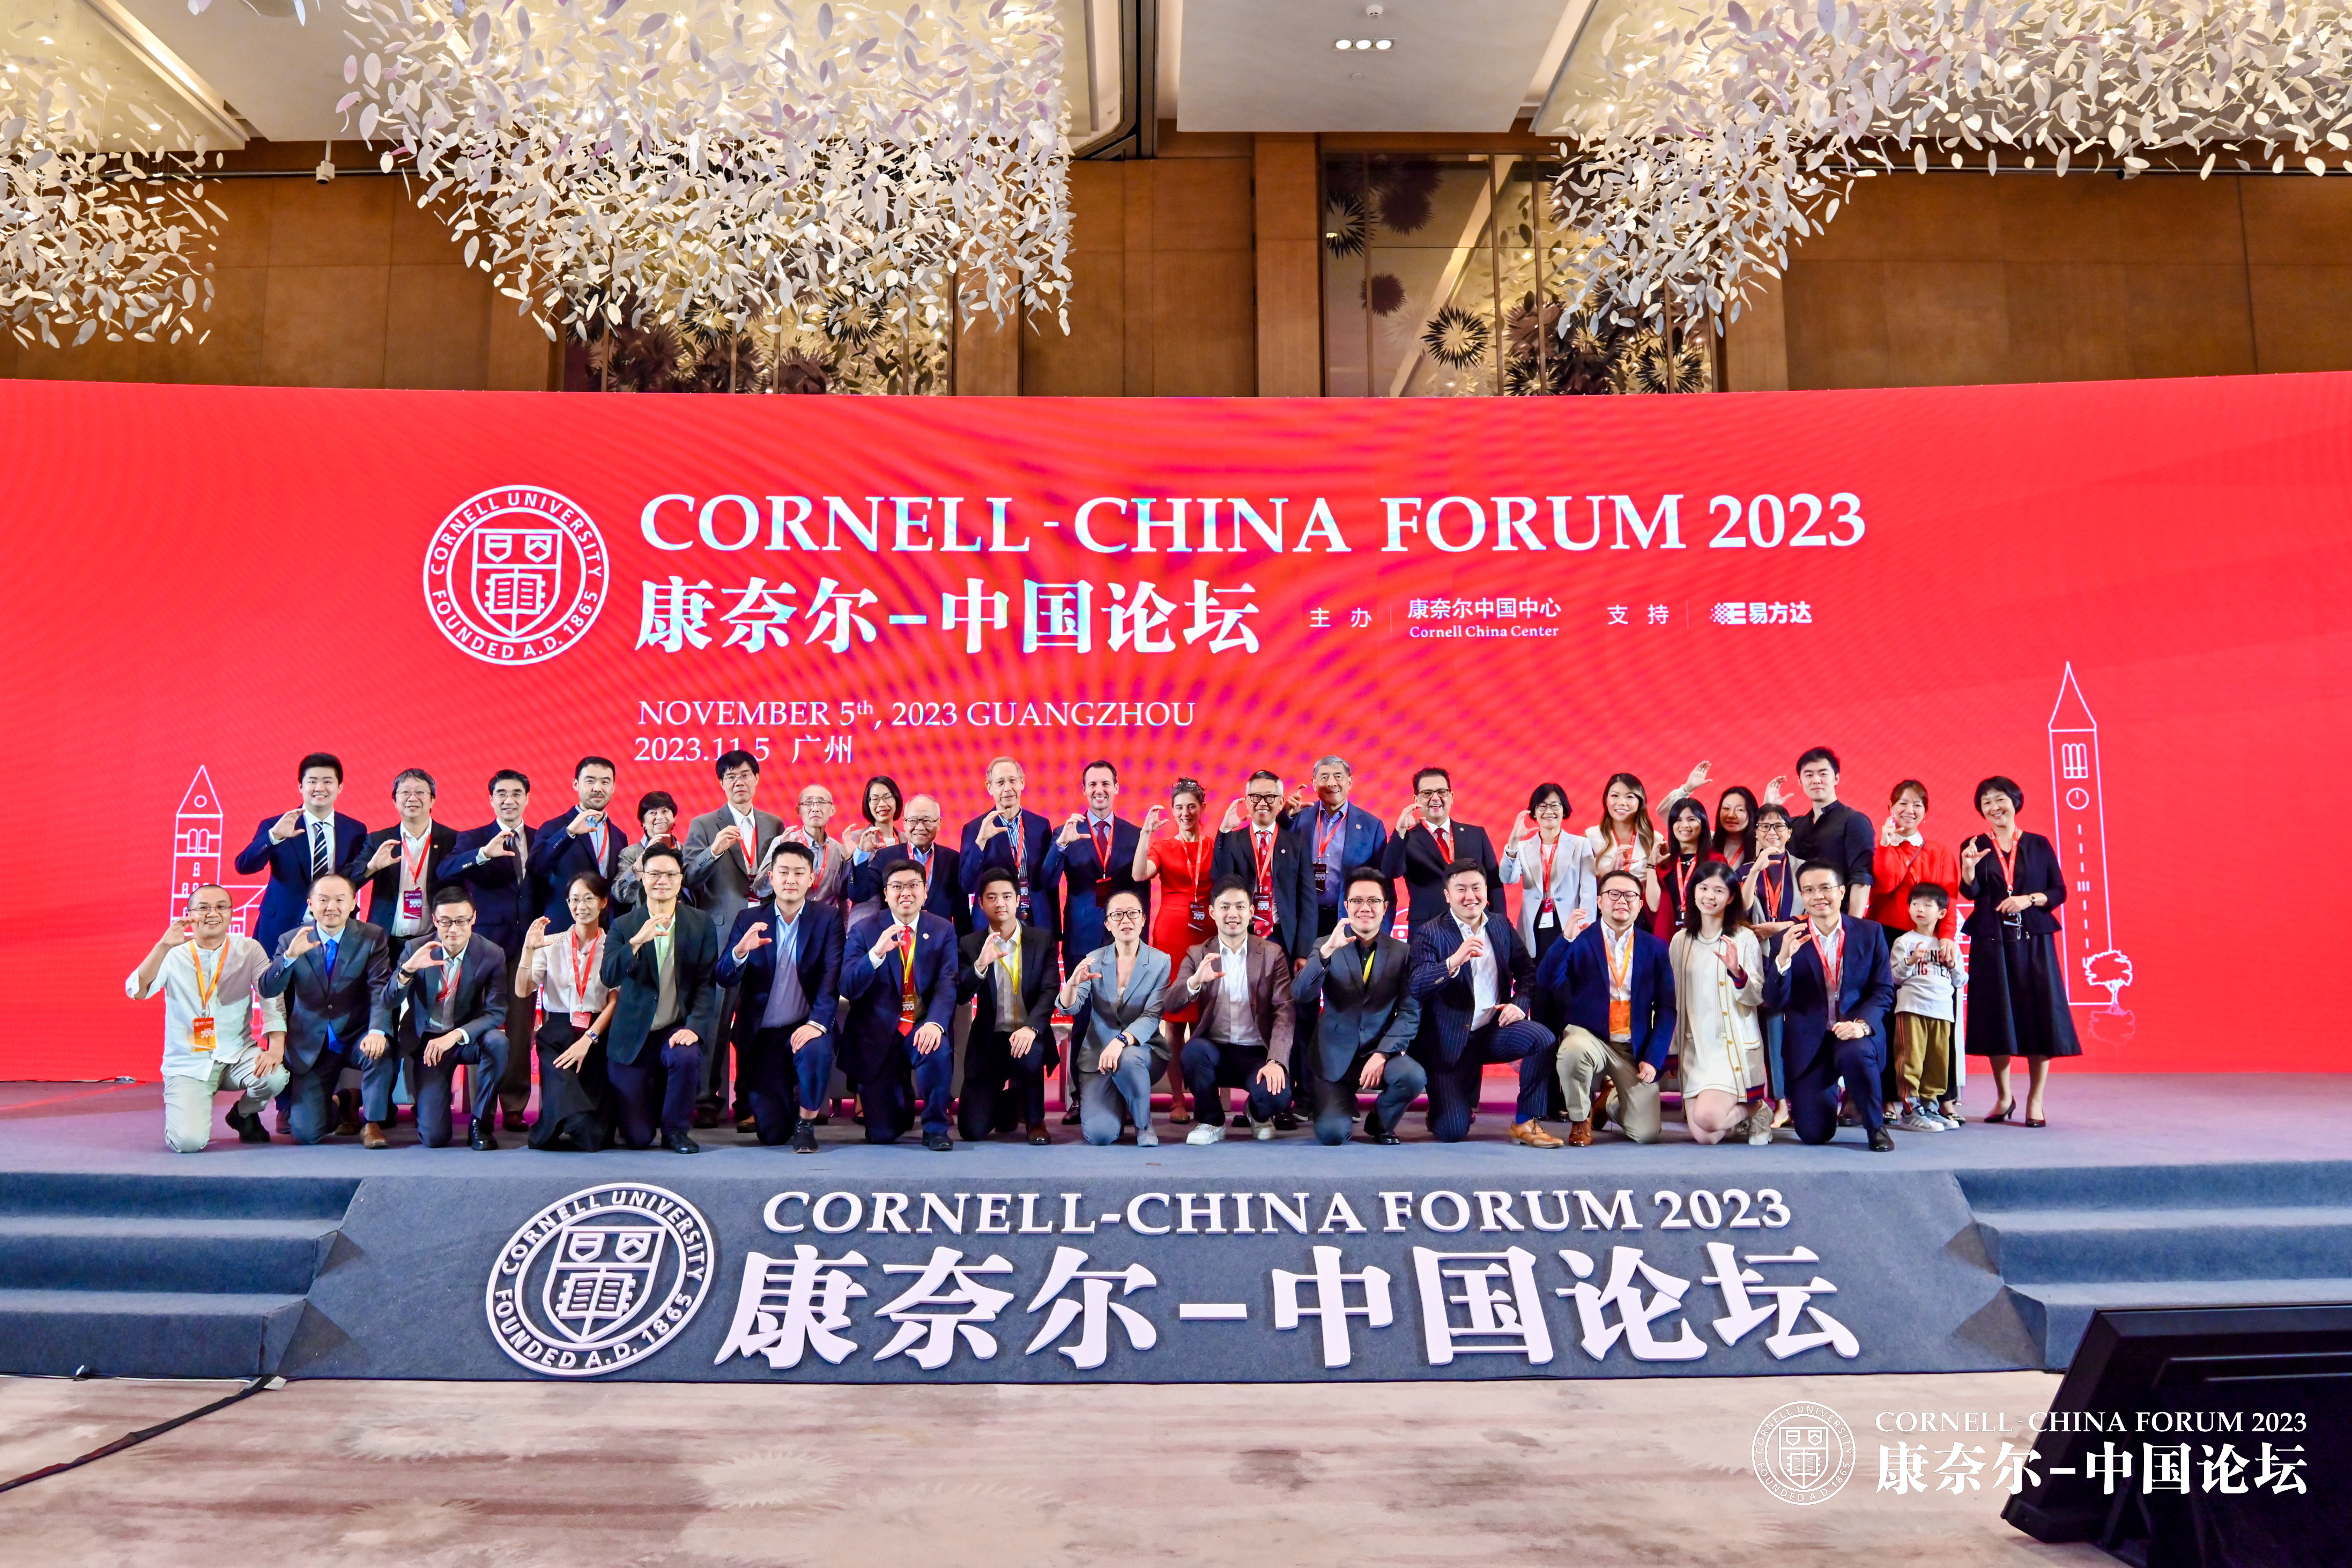 Cornell-China Forum 2023 group on stage